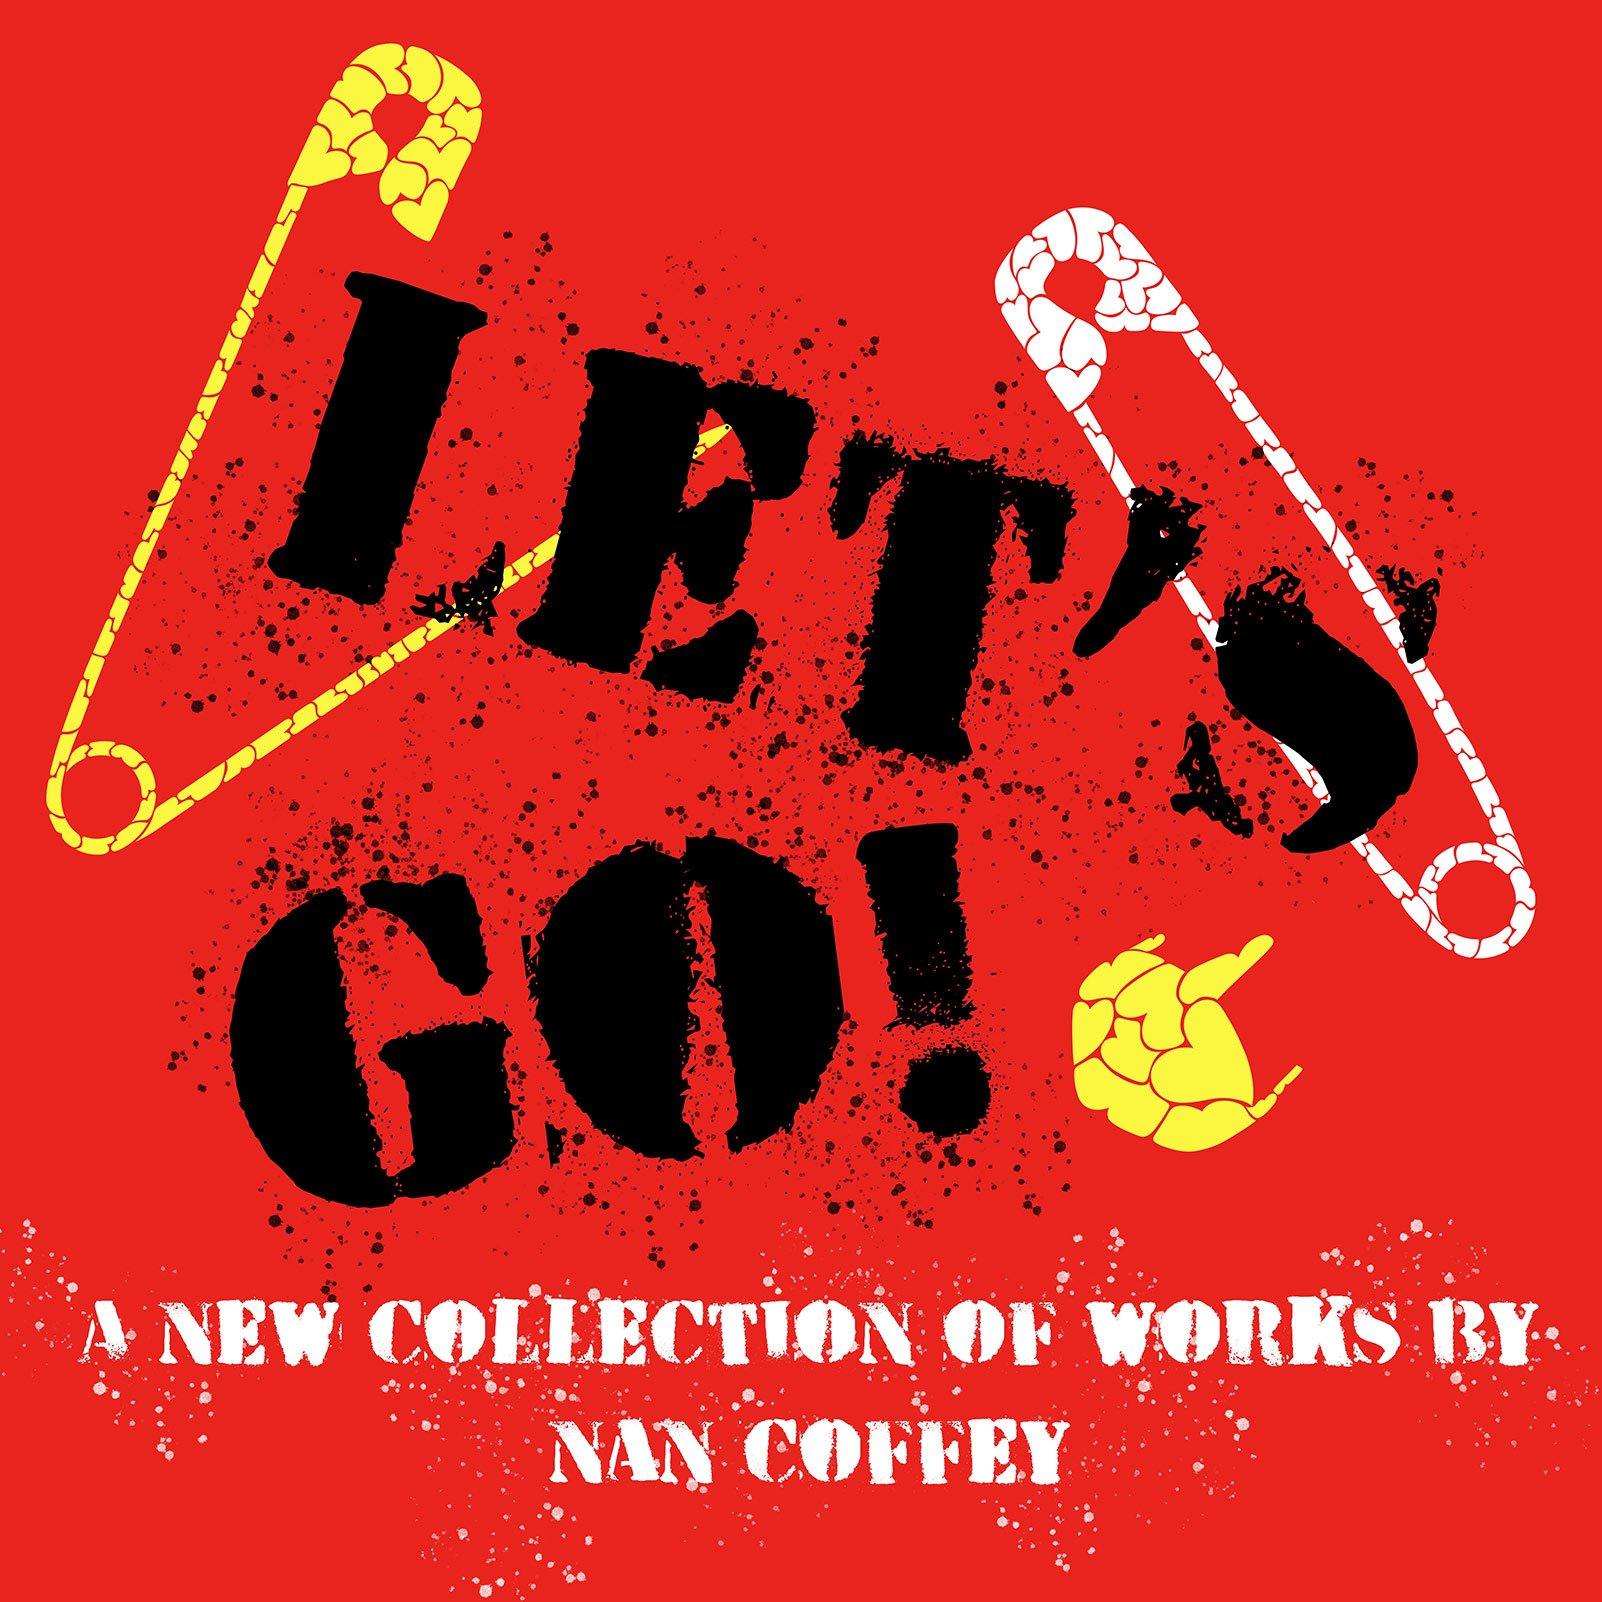 Let's Go! Print Collection - The Art Of Nan Coffey